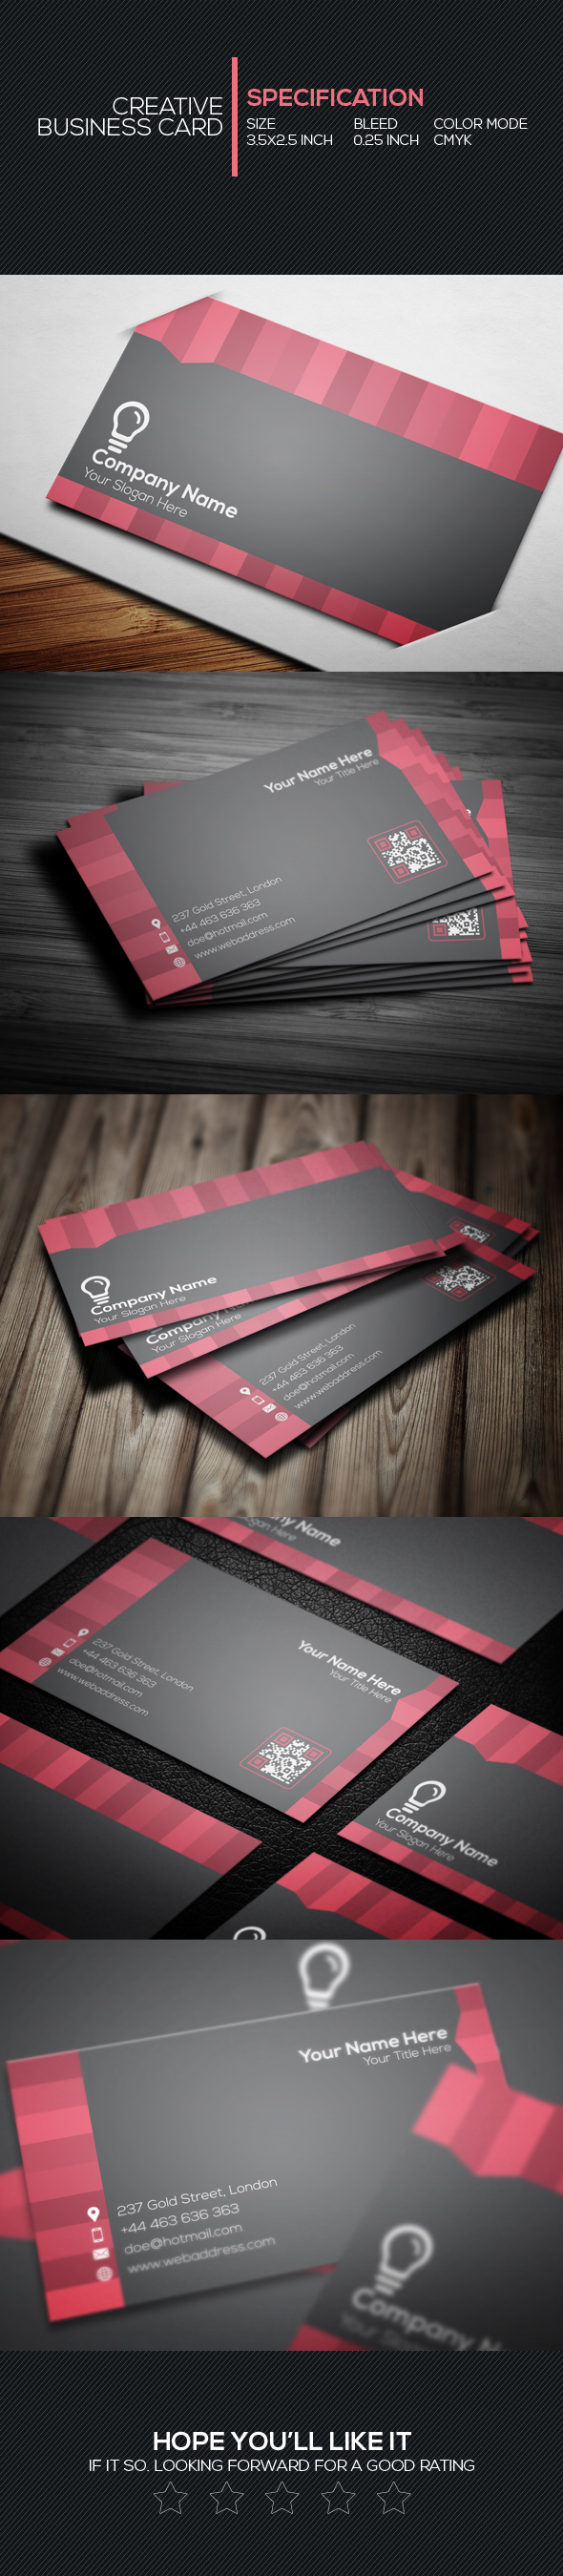 cool corporate creative 300 dpi amazing classified mind blowing business card 3.5x2.5 design template bc template company card professional modern